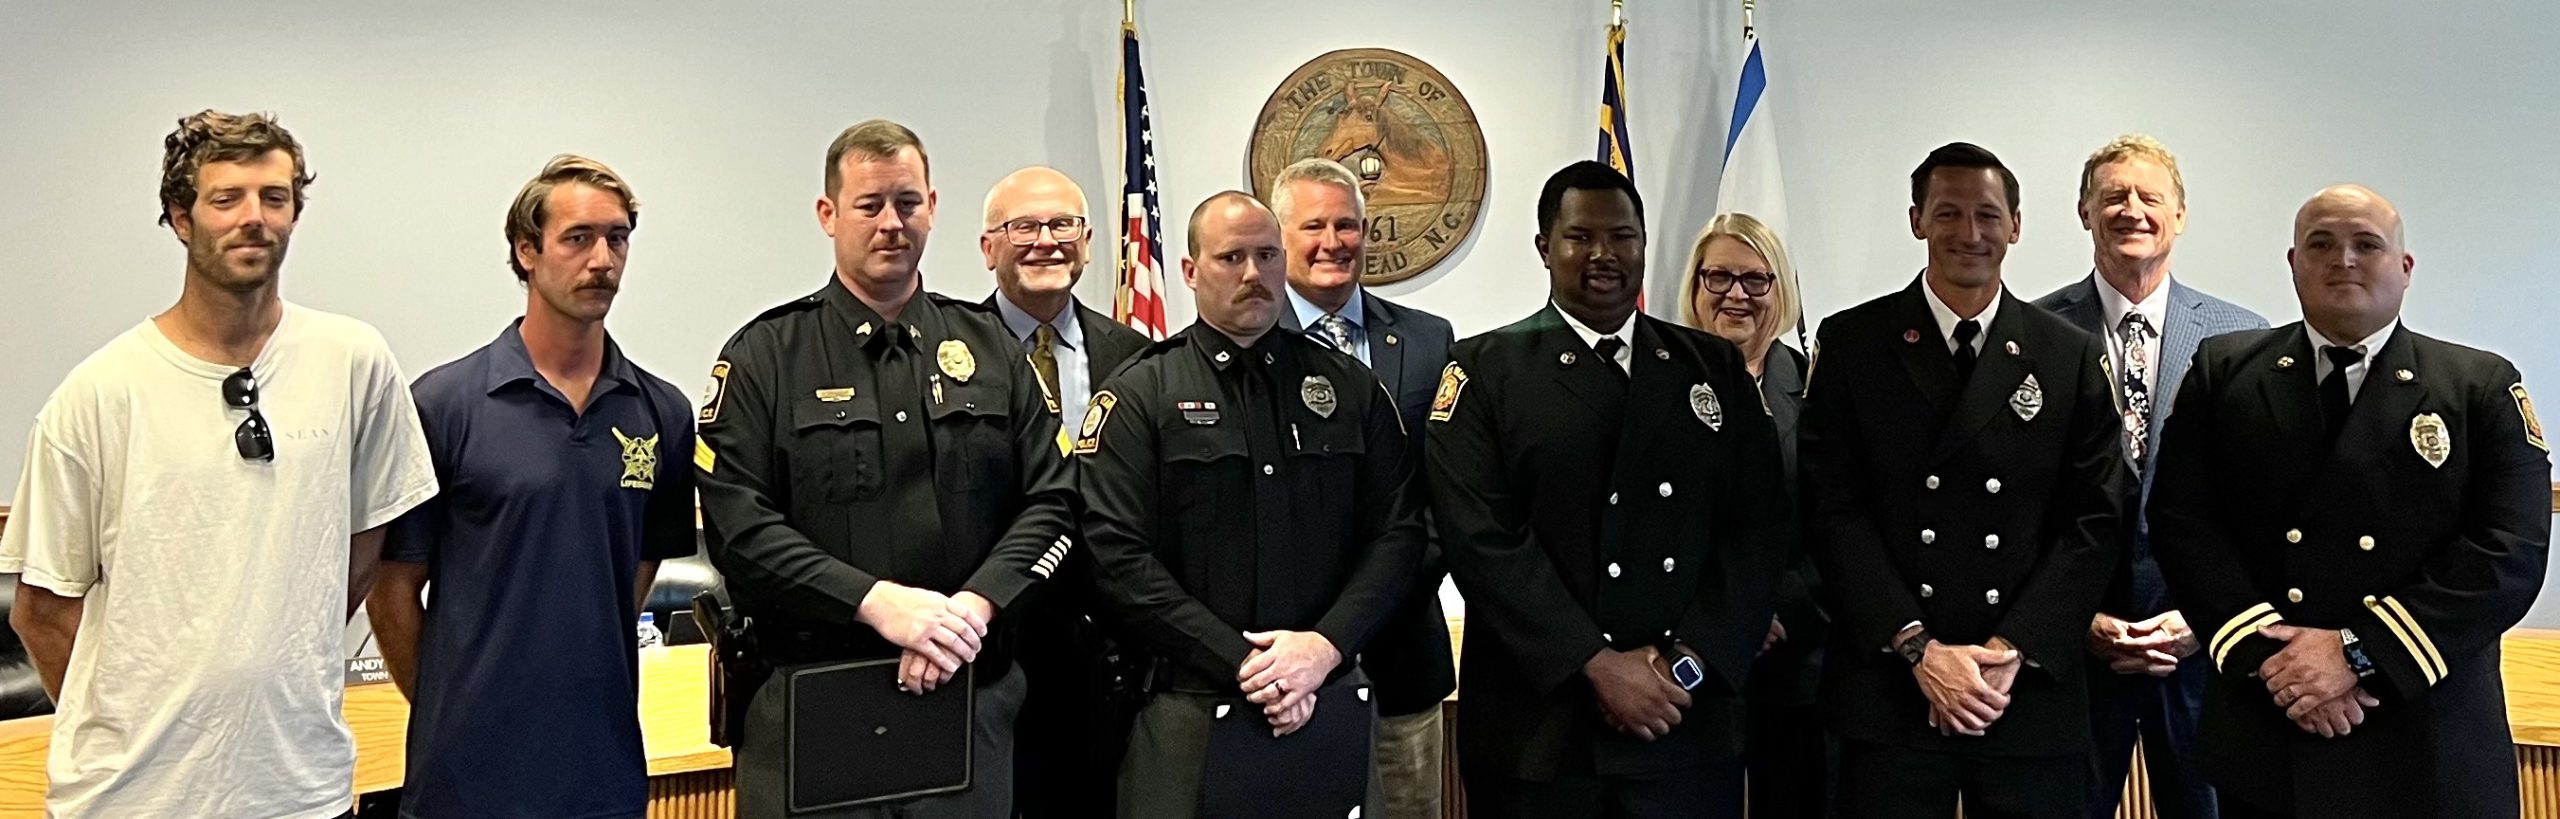 Seven Nags Head first responders honored for saving life of two-year-old child